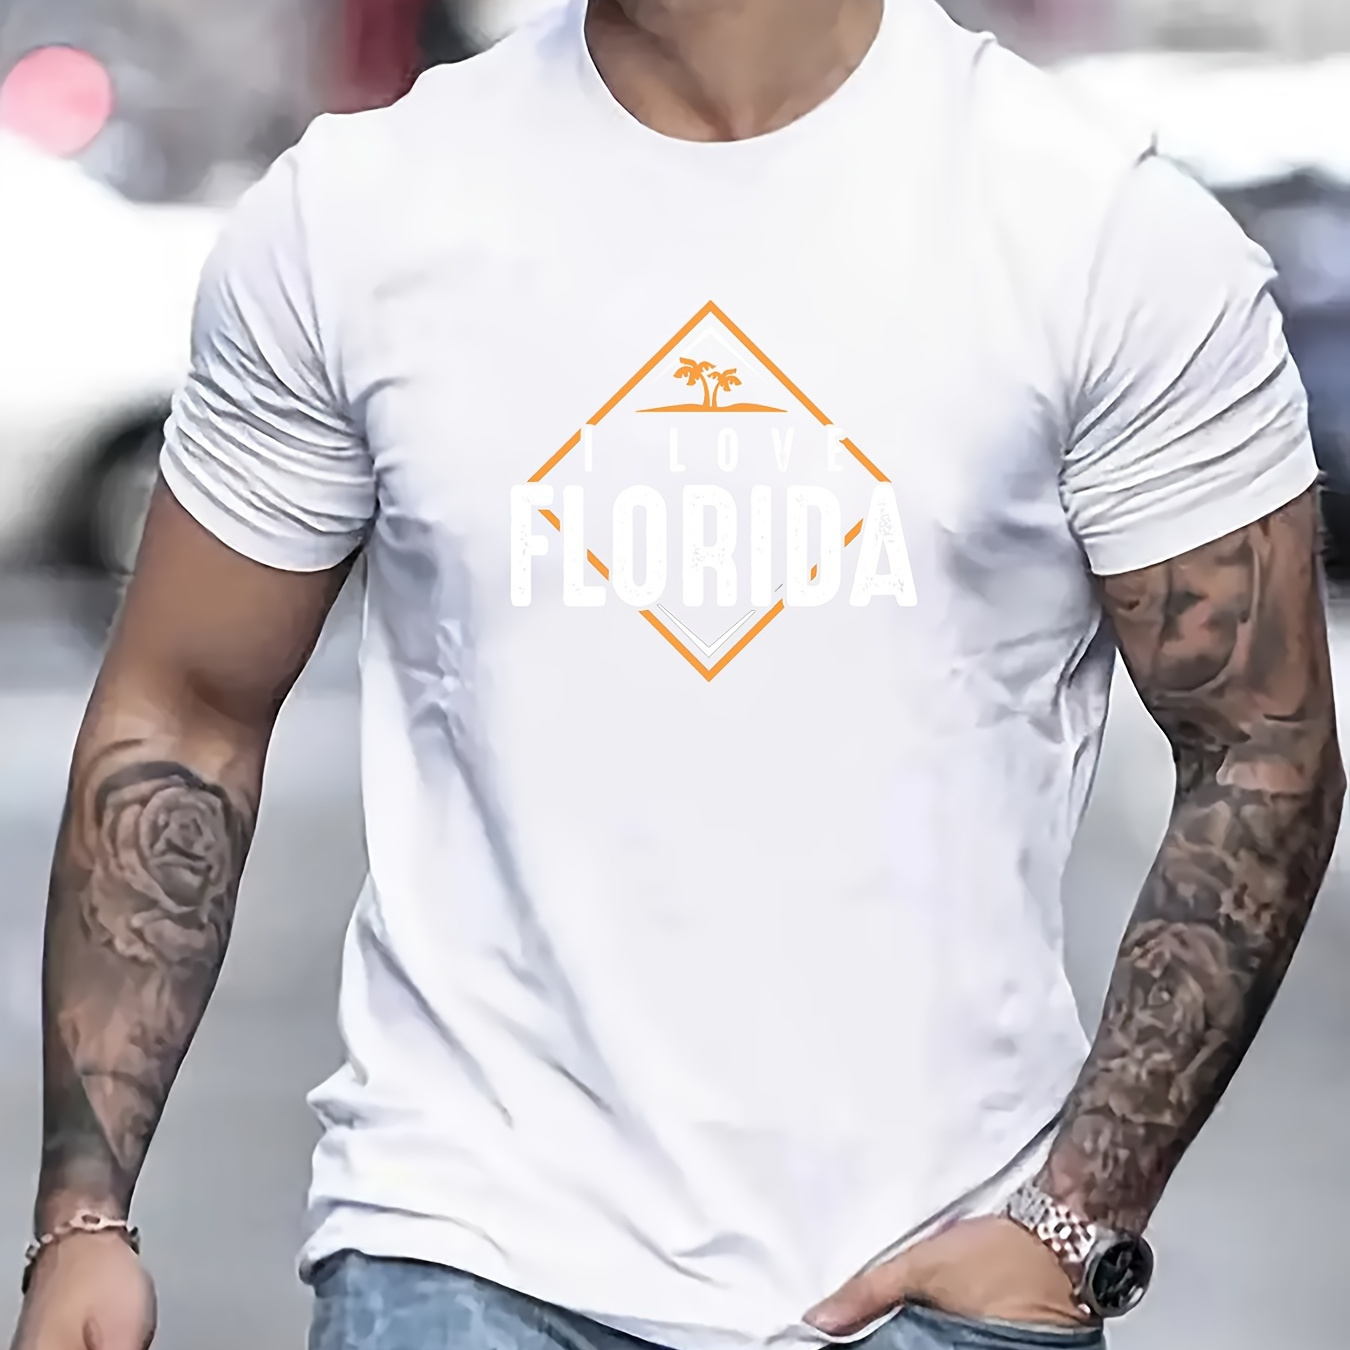 

Florida Print Men's Trendy Short Sleeve T-shirts, Comfy Casual Breathable Tops For Men's Fitness Training, Jogging, Outdoor Activities